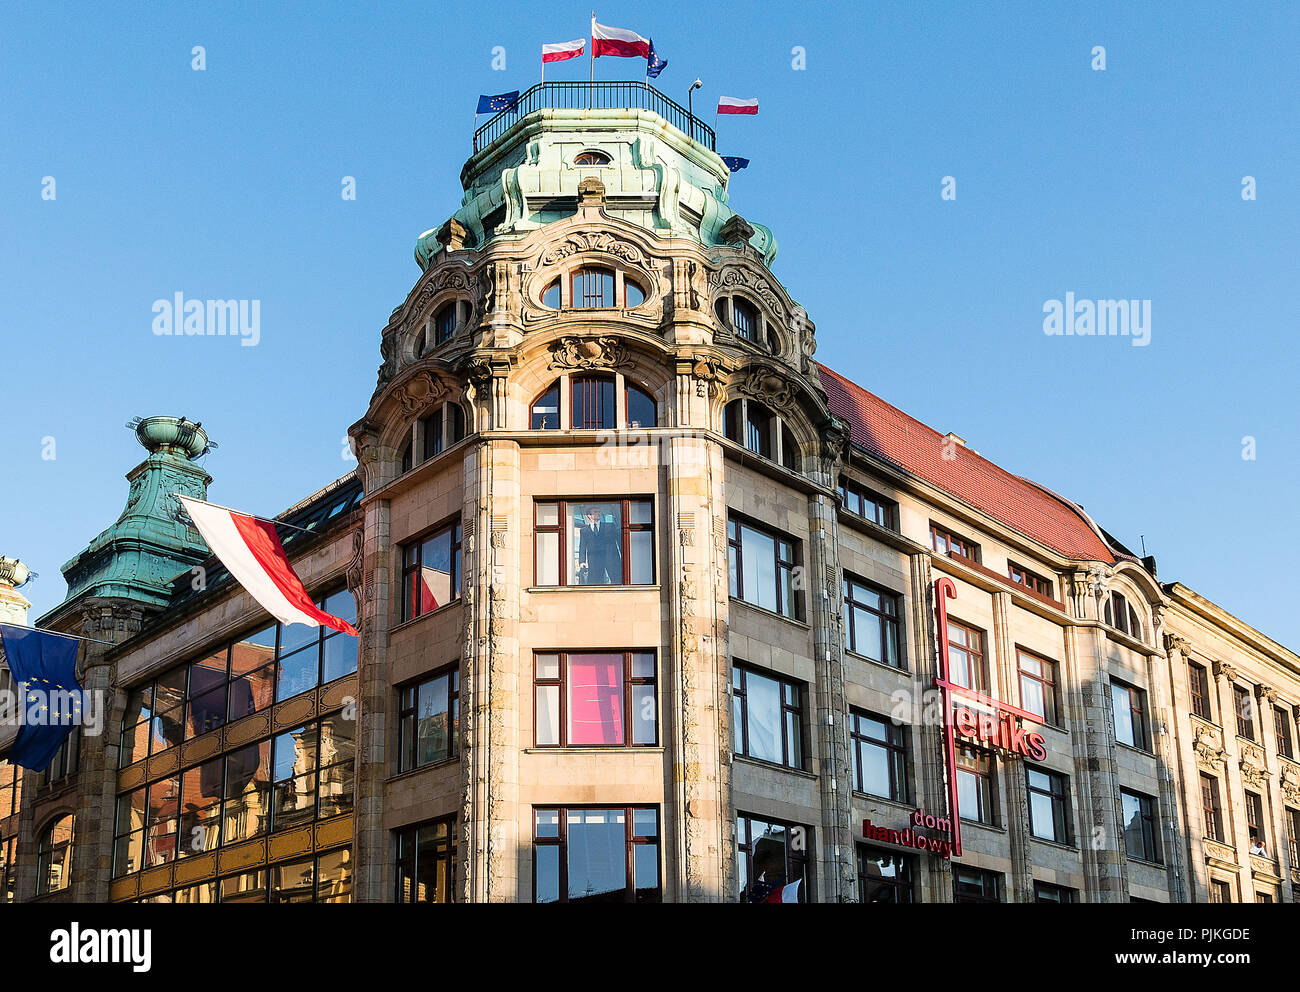 Poland, Wroclaw, Rynek, former trading house of the Barasch brothers Stock Photo